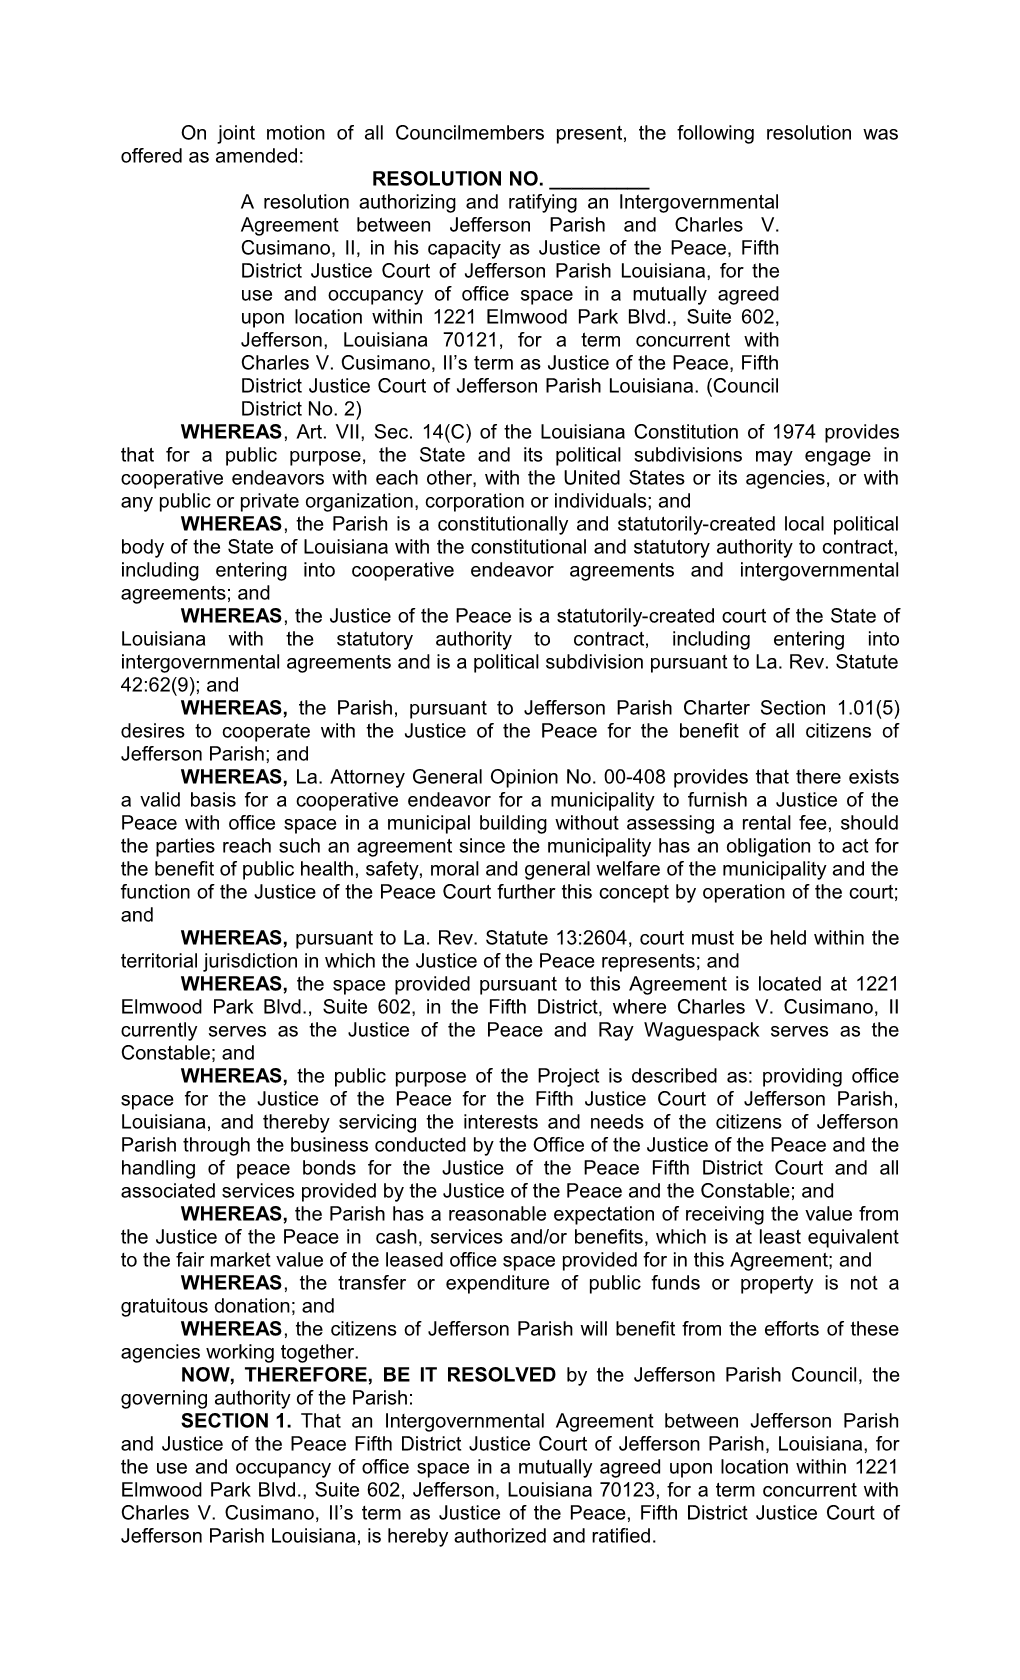 On Joint Motion of All Councilmembers Present, the Following Resolution Was Offered As Amended